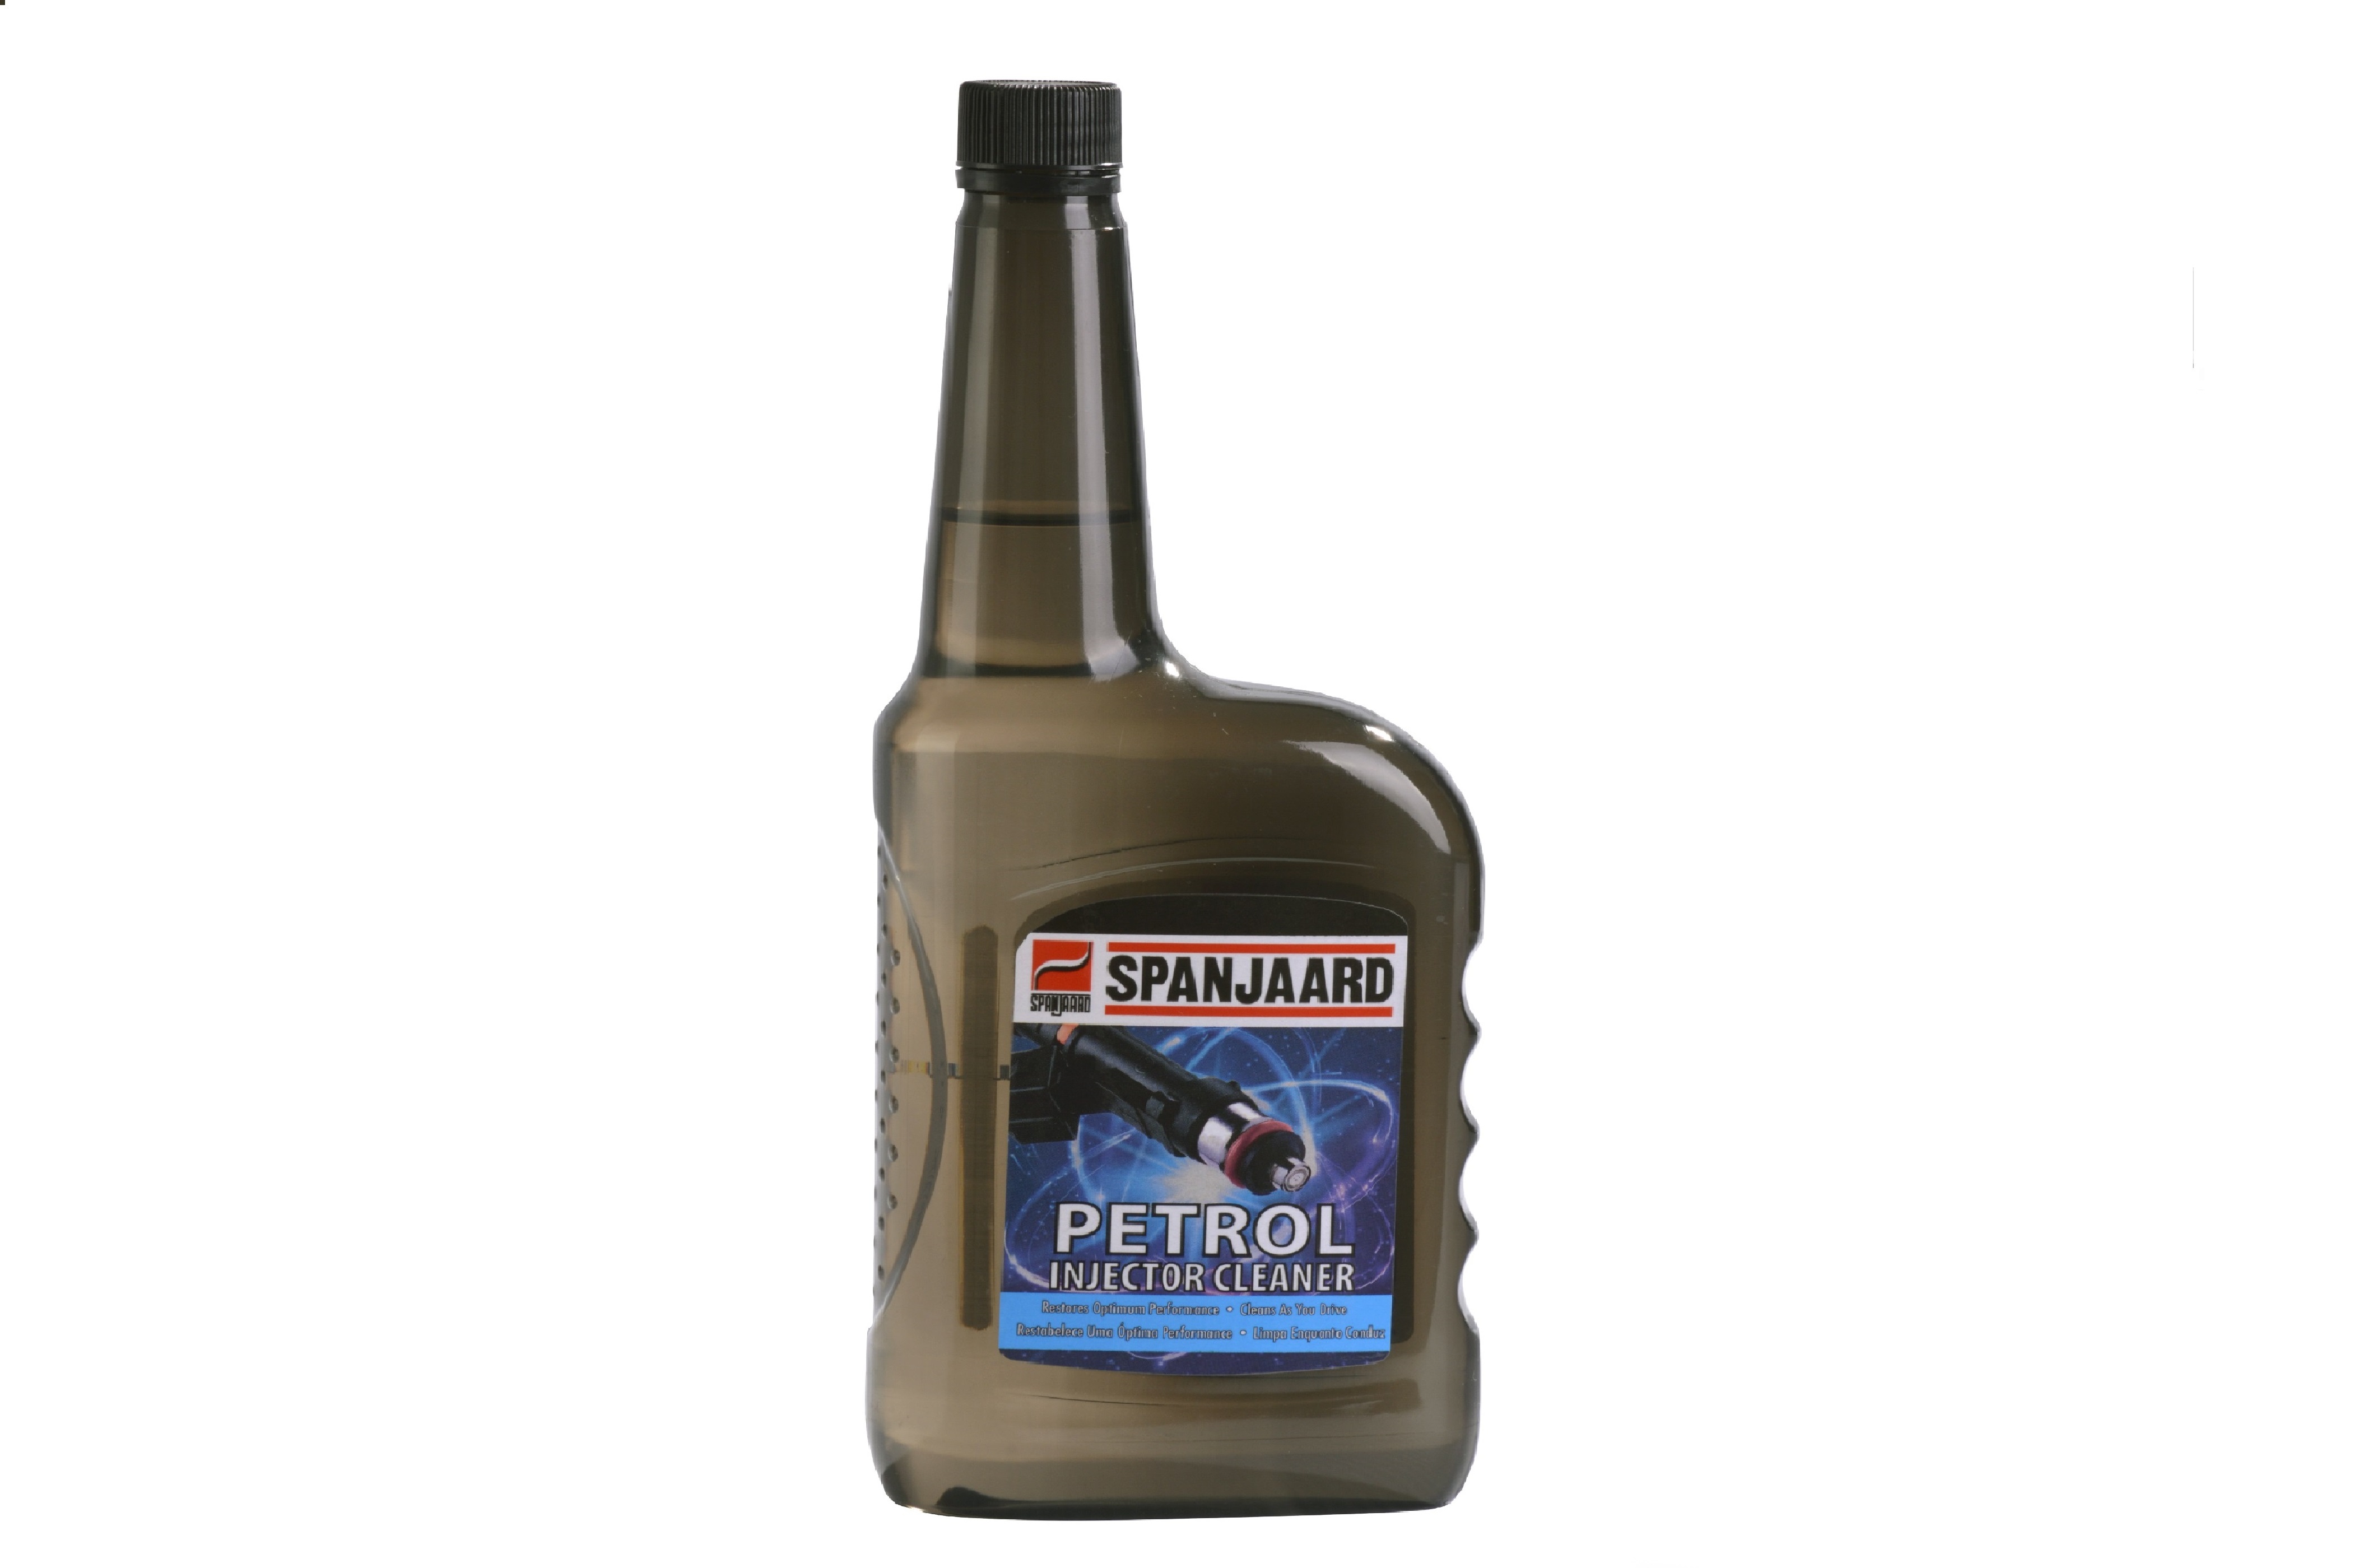 PETROL INJECTOR CLEANER